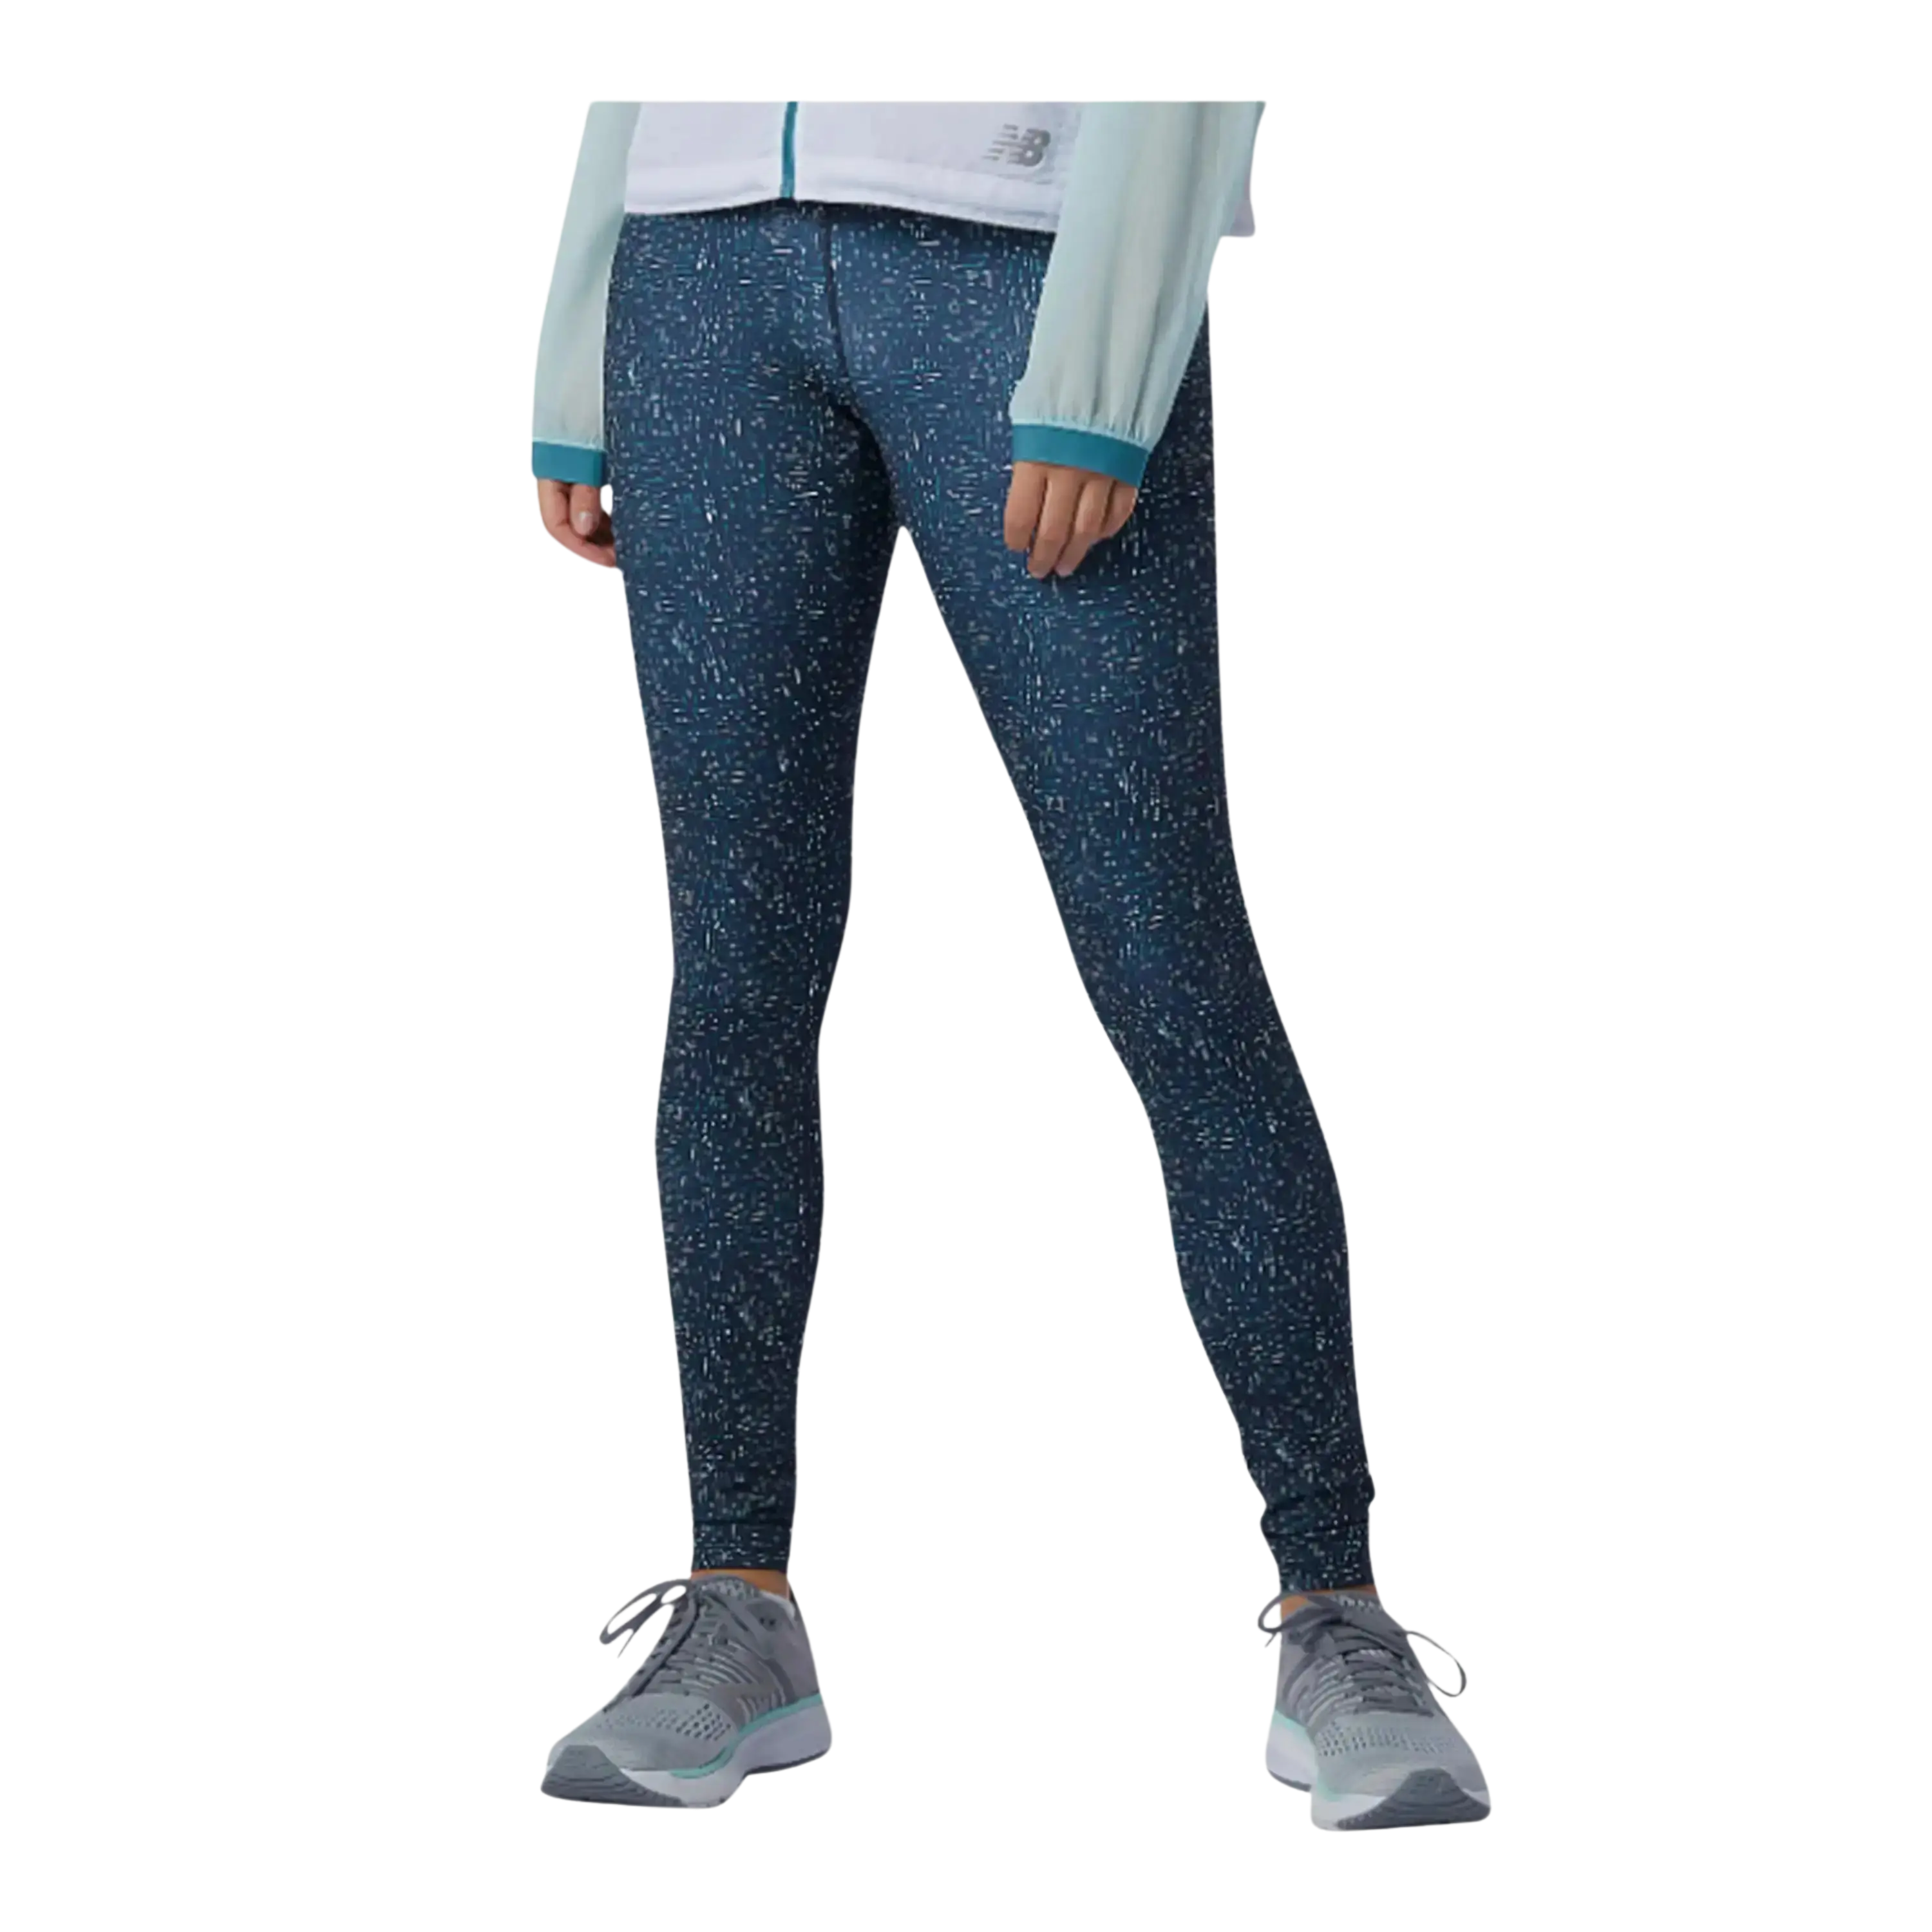 New Balance Printed Impact Running Tights for Women